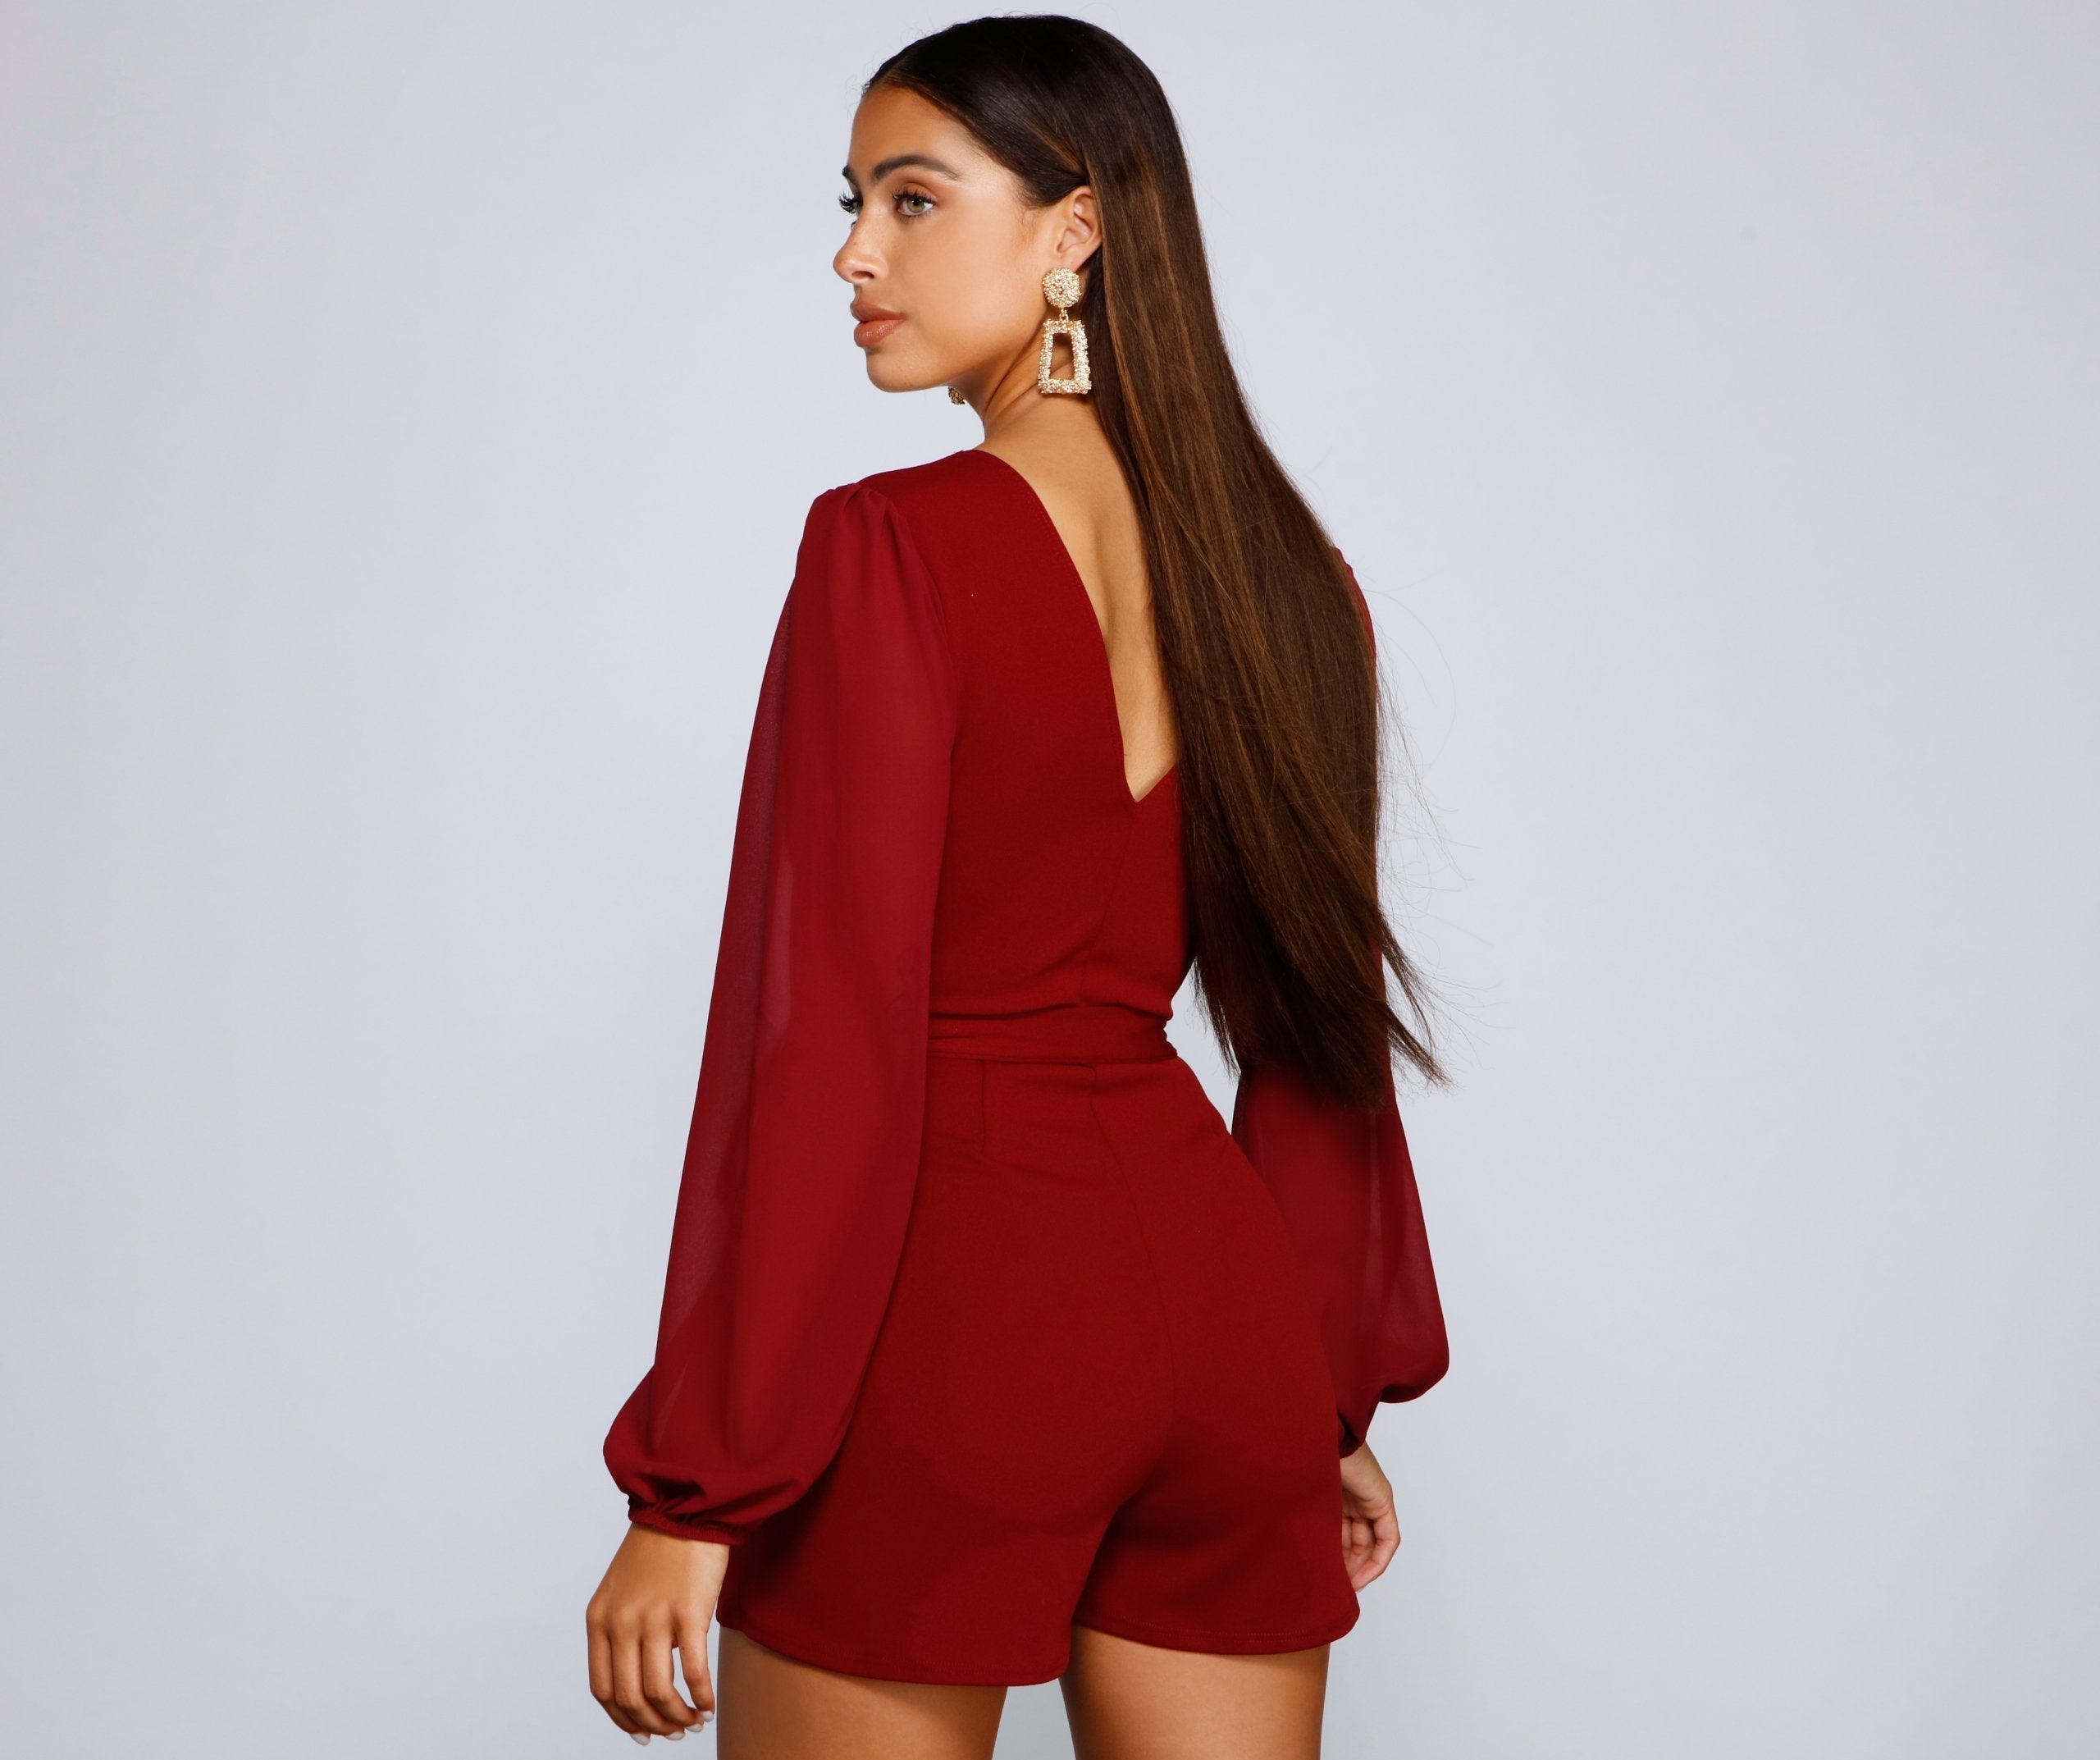 Perfectly Poised Plunging Chiffon Romper